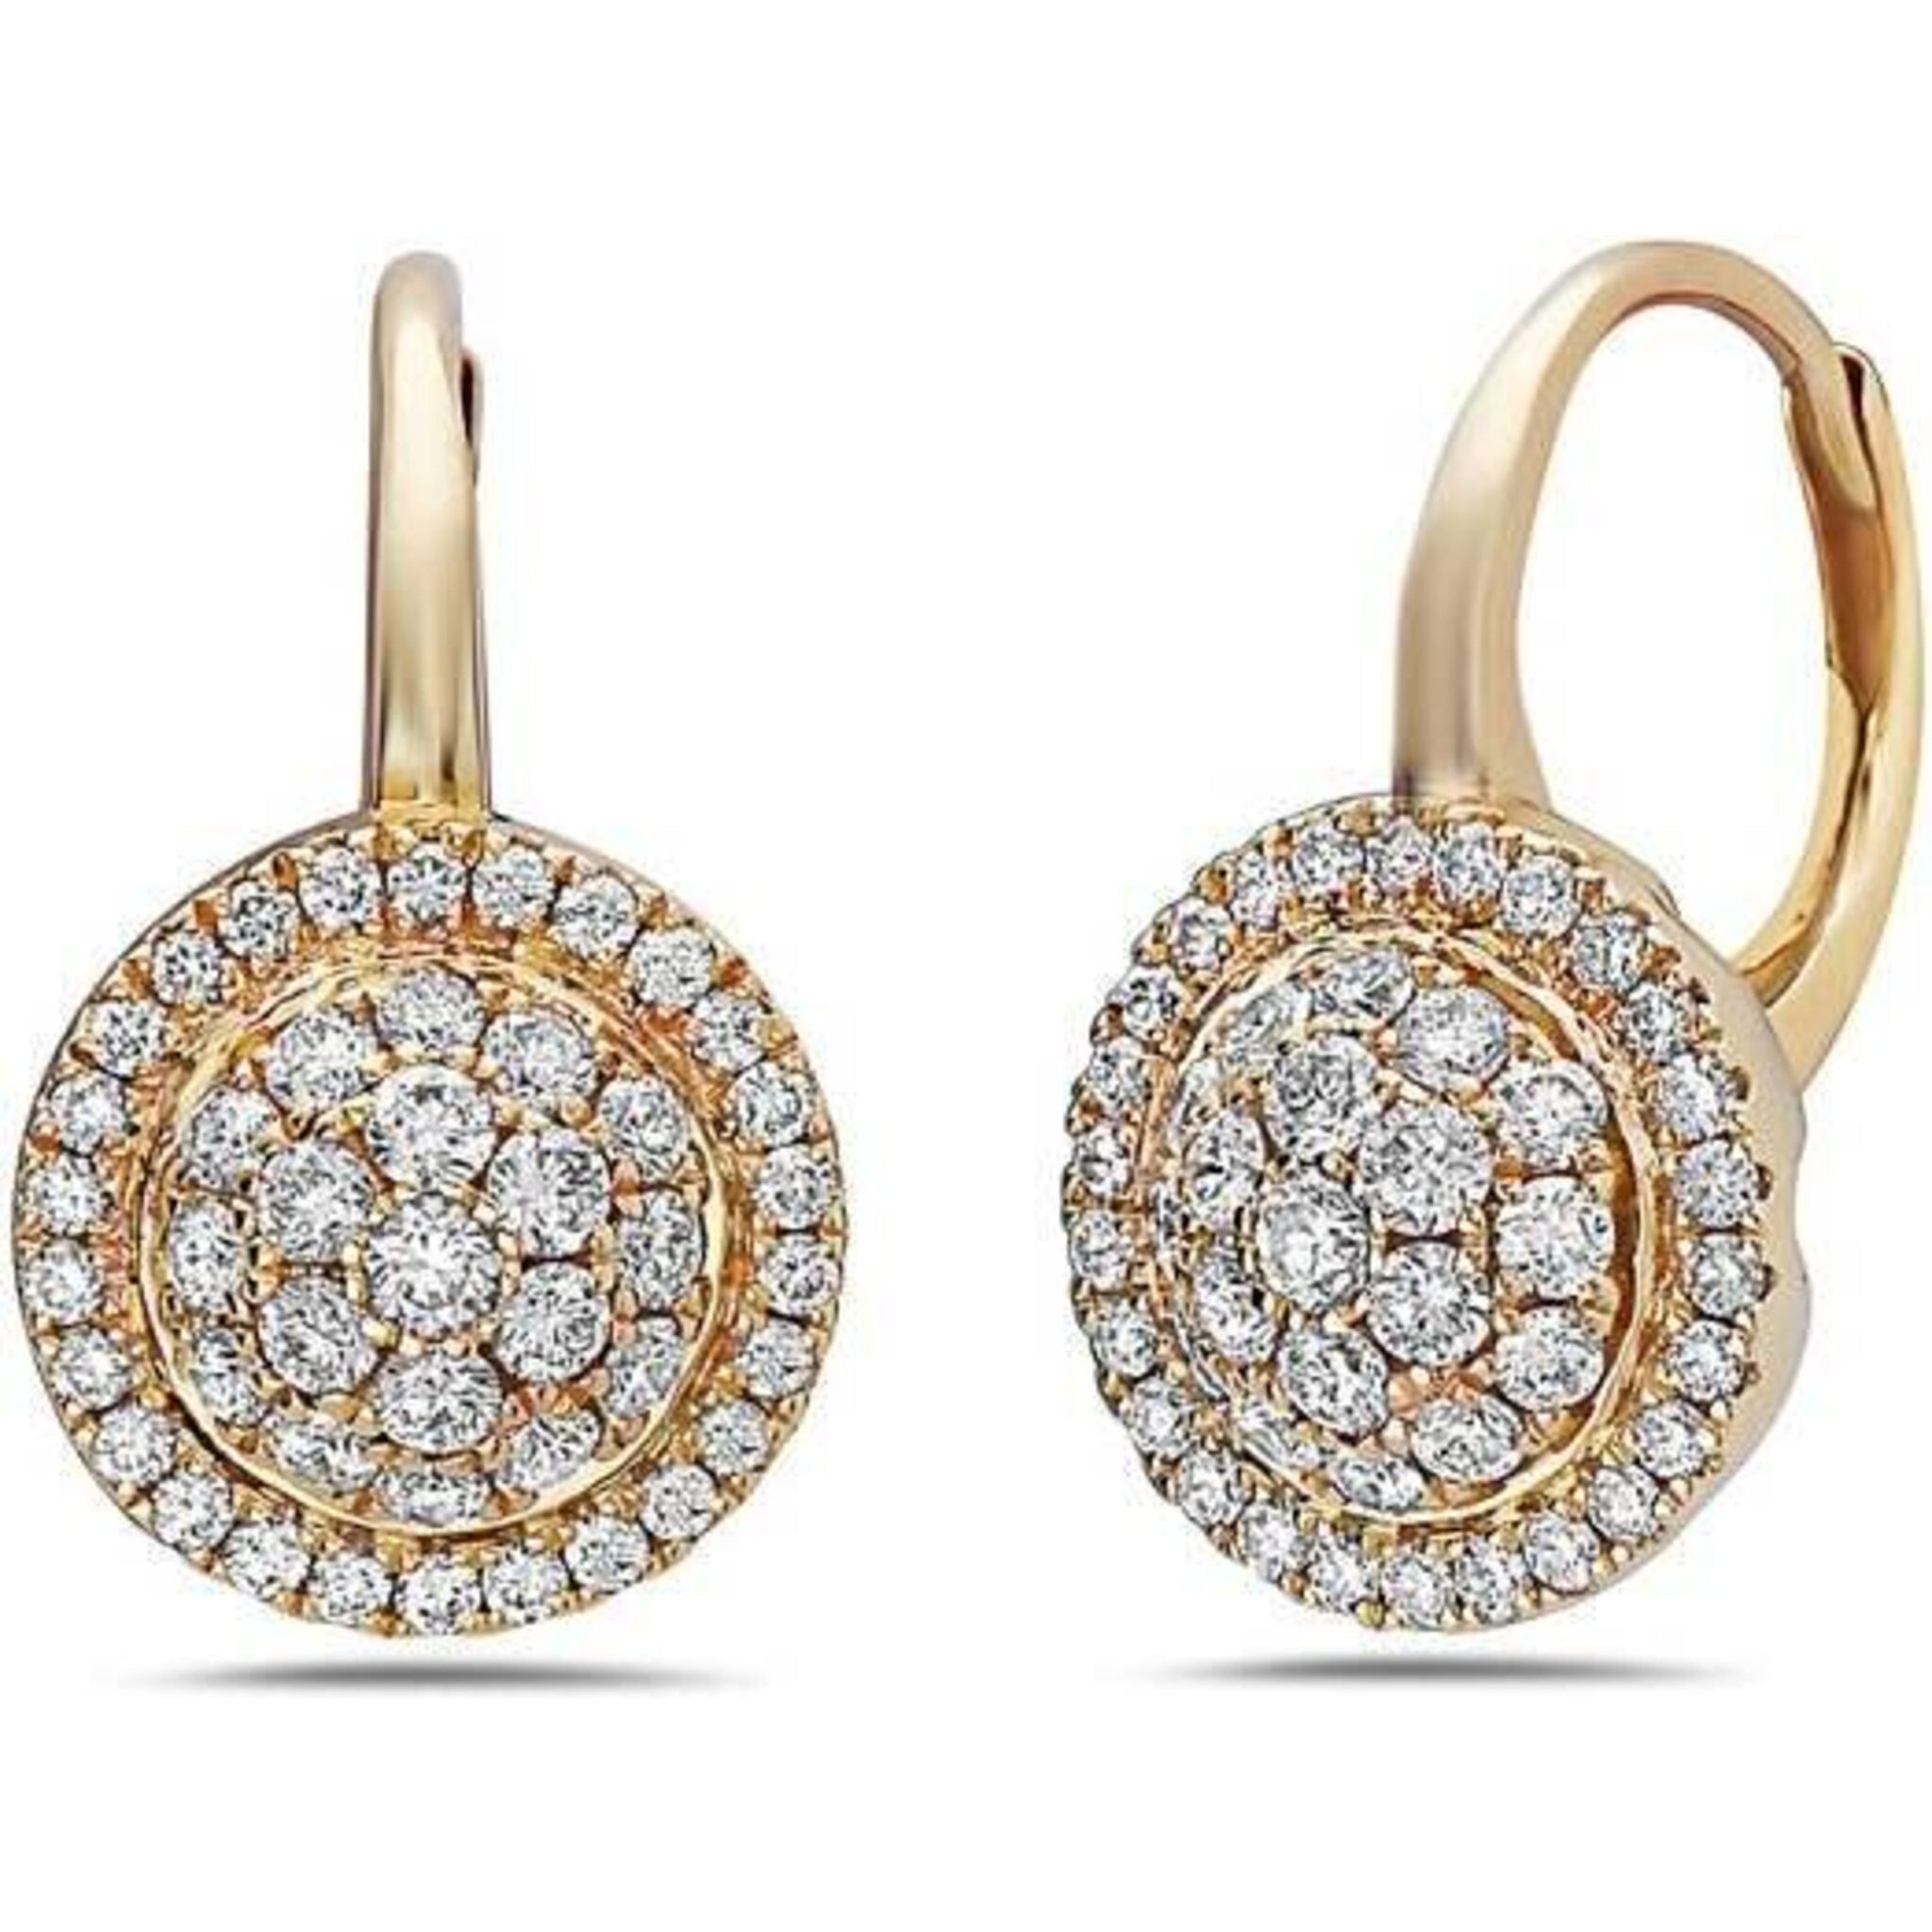 Charles Krypell - Diamond Station Drop Earring - Yellow Gold